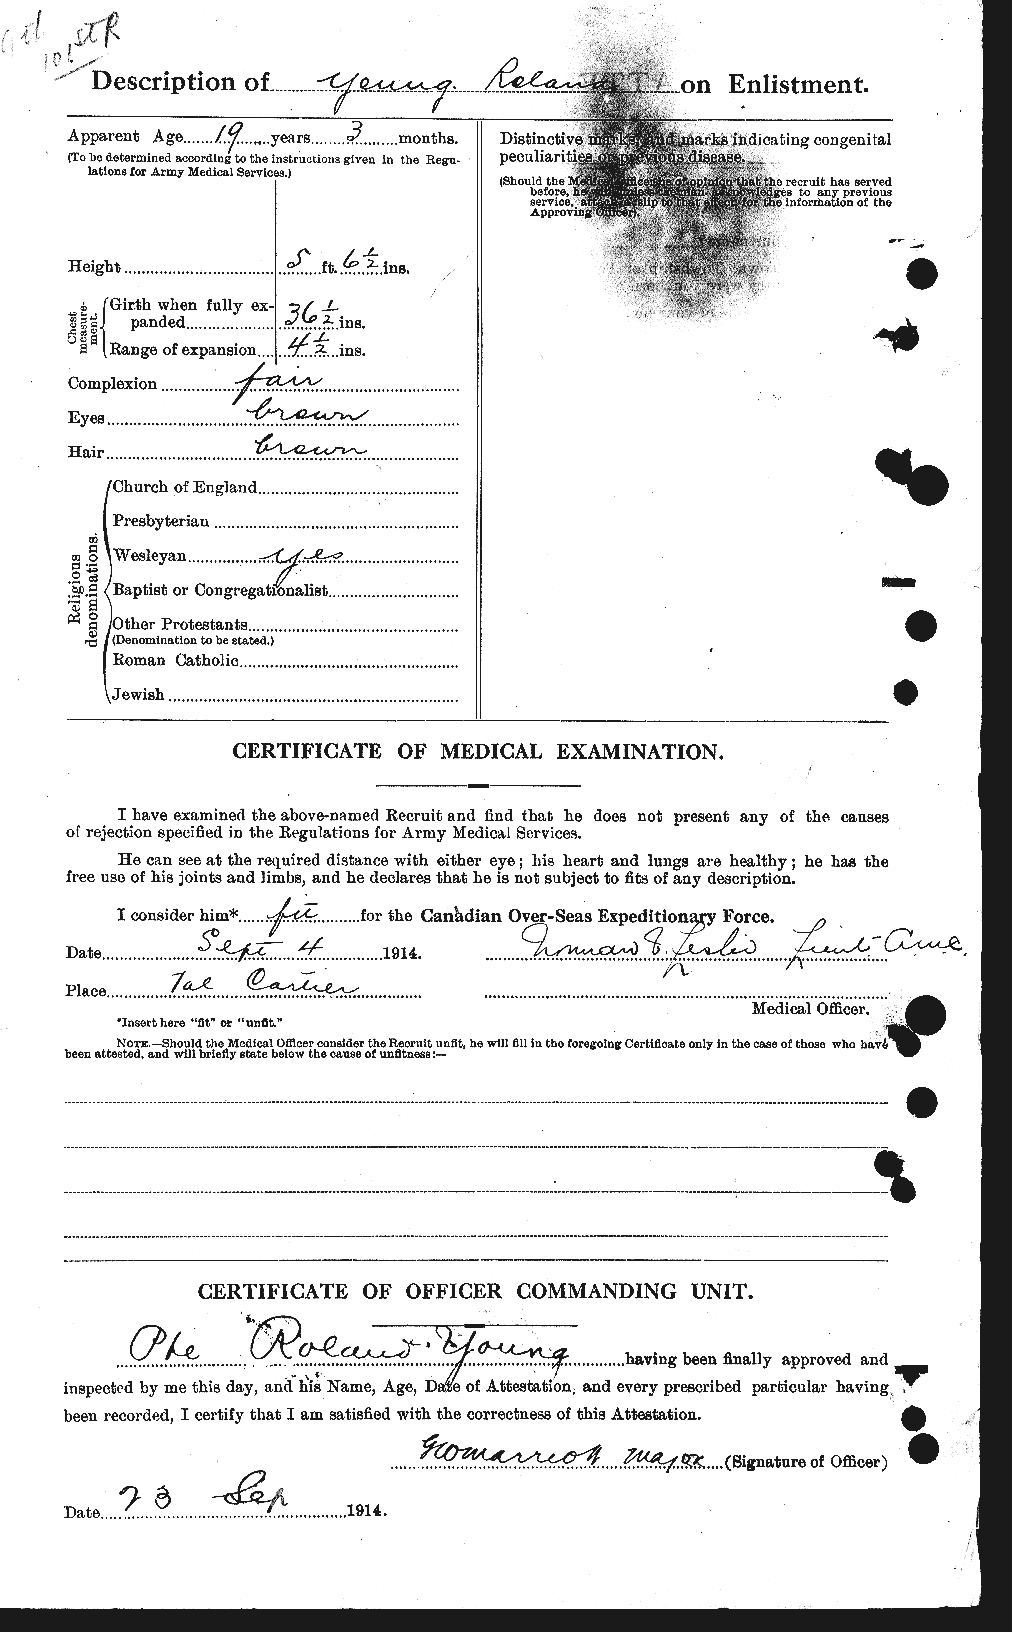 Attestation record: Roland Sydney Young